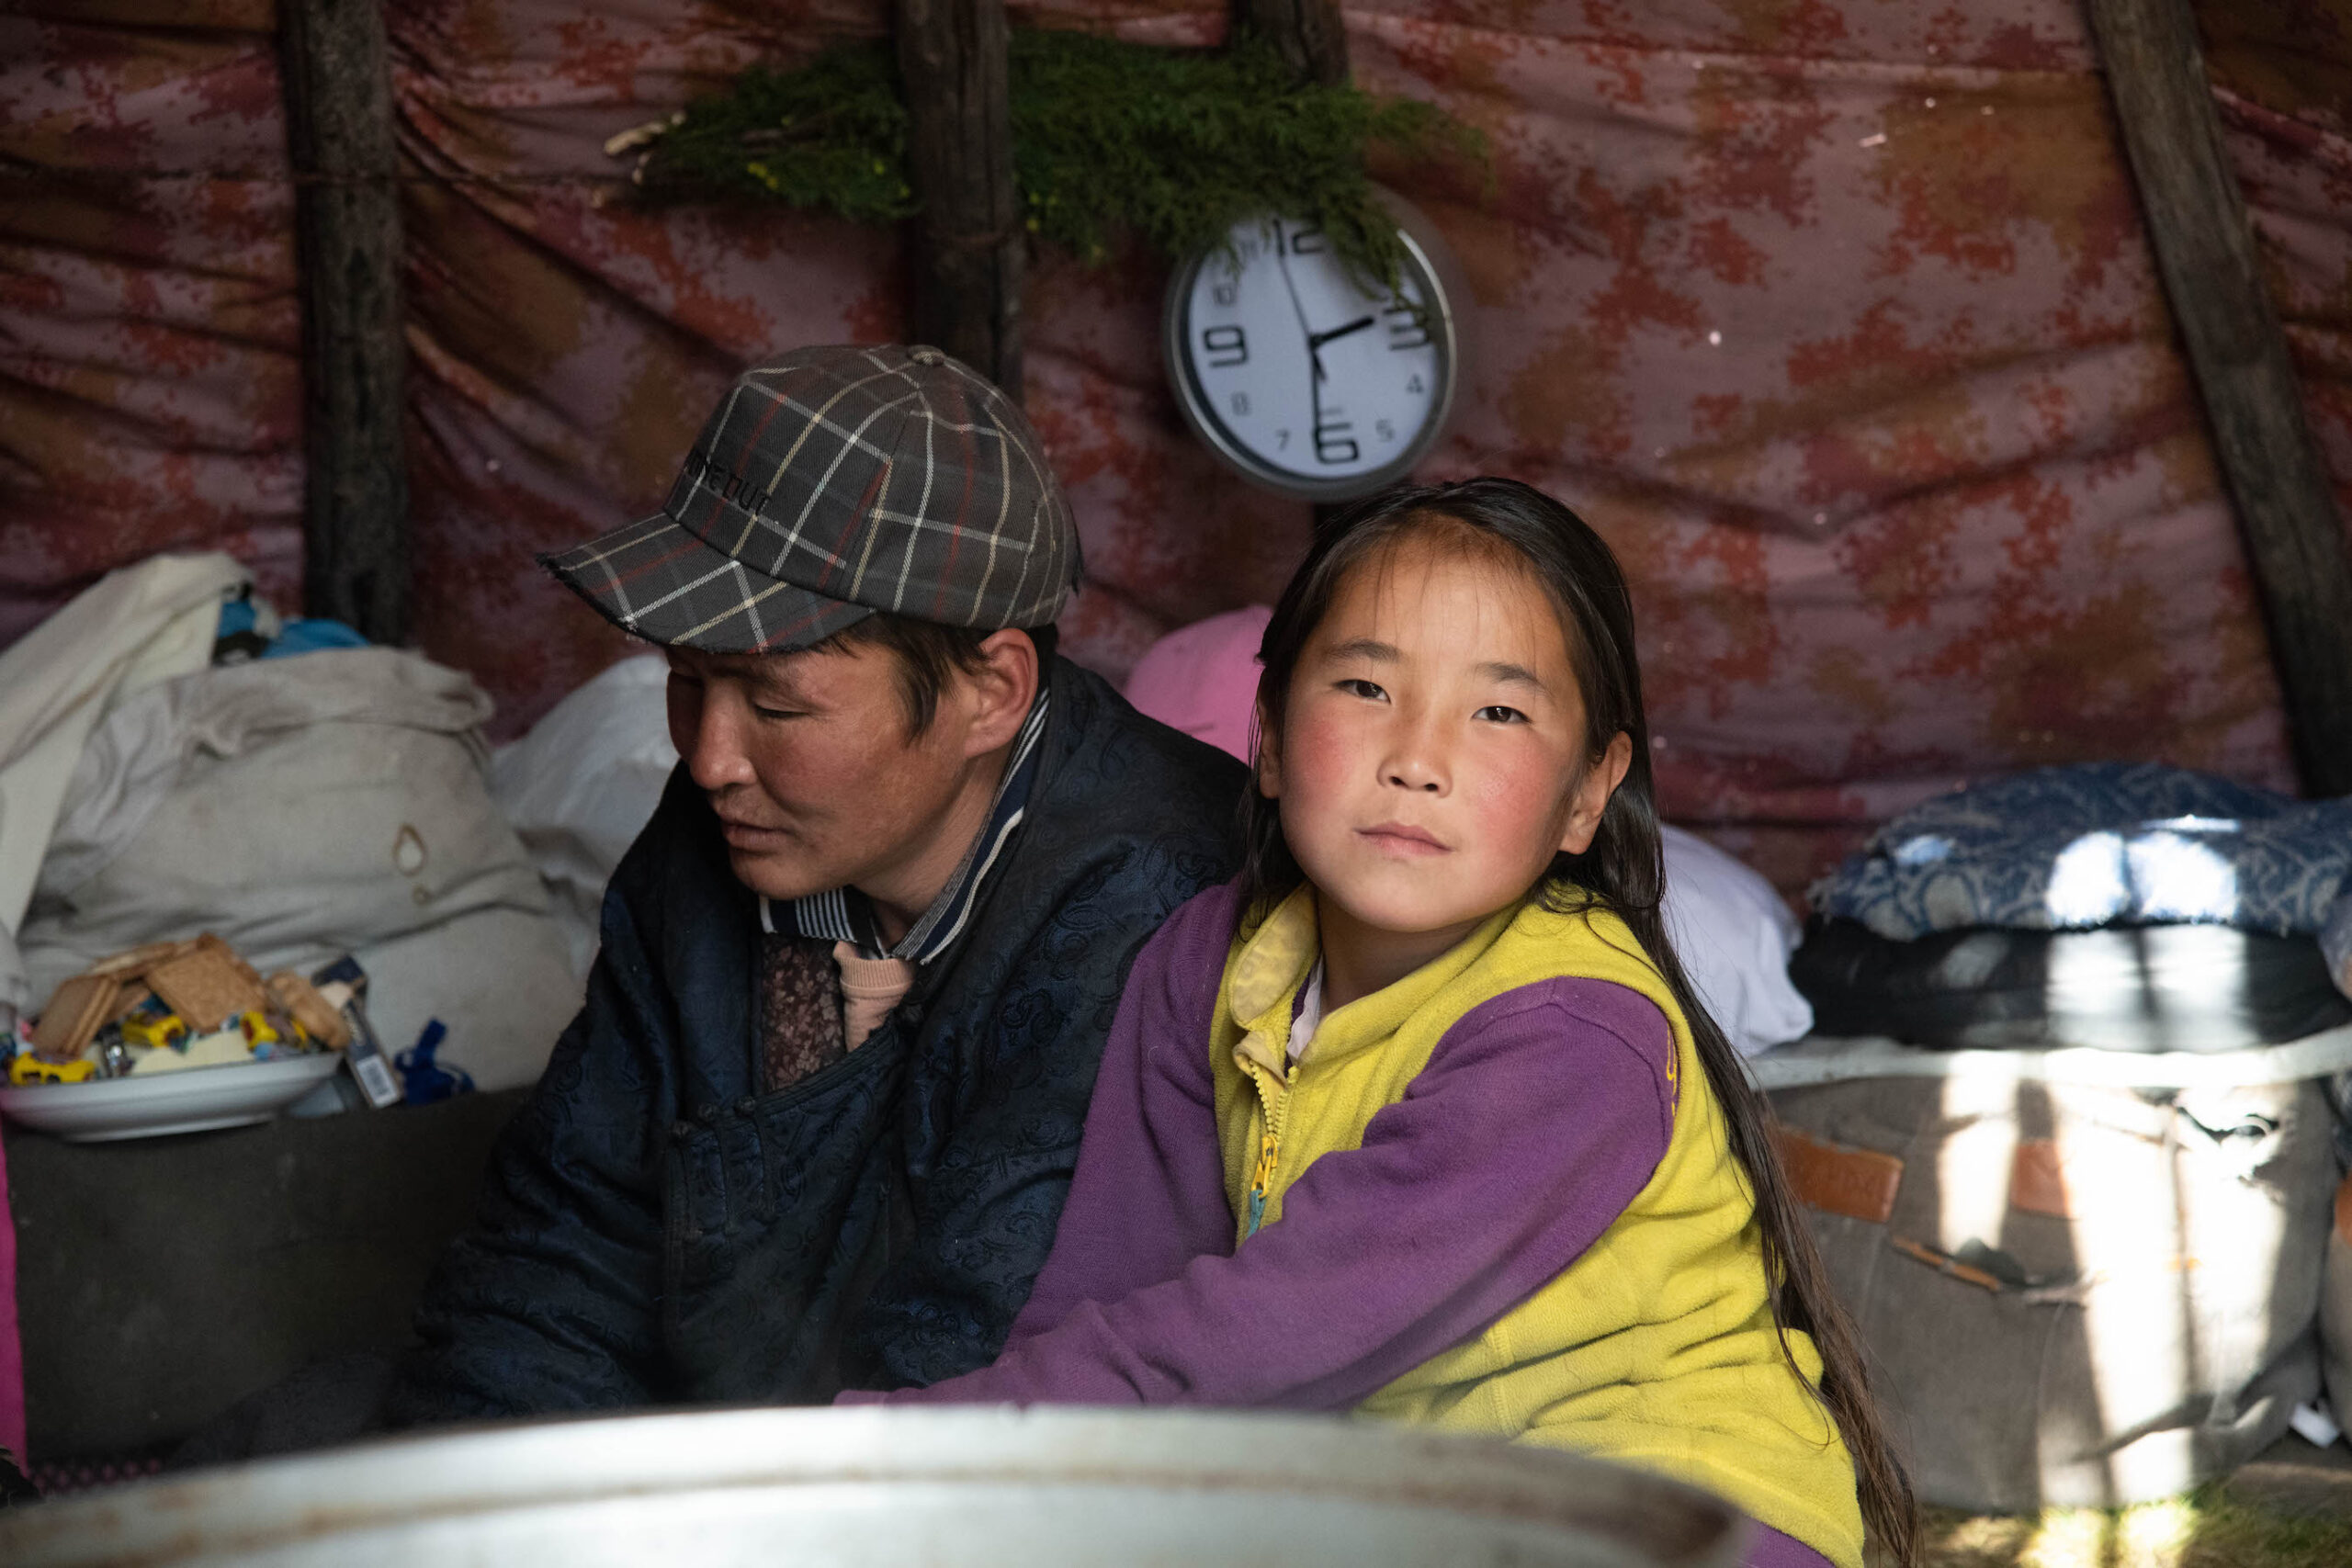 A girl in a yellow vest and a purple sweater looks and the camera while she sits near her father, Galaa. They are in a tent, and he is wearing a baseball cap.